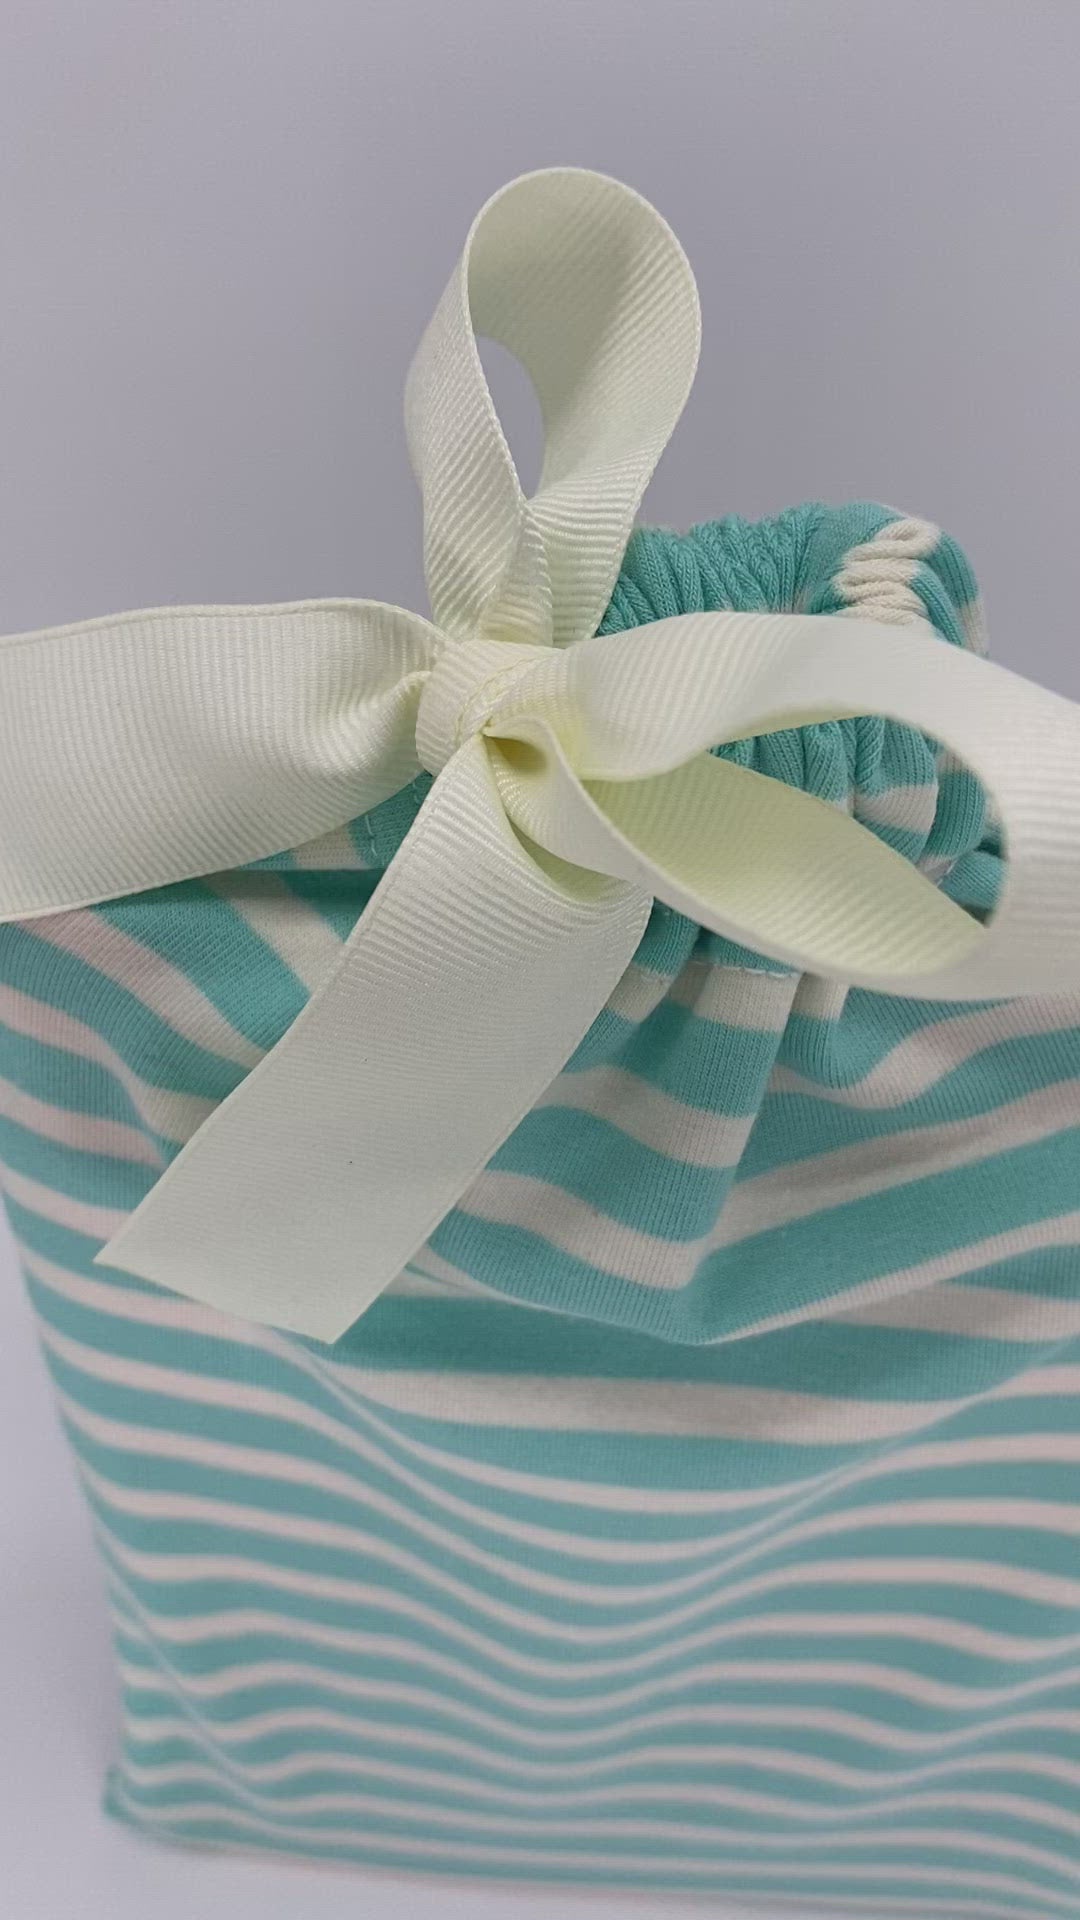 small fabric gift bag in turquoise and white stripe pattern with a ribbon